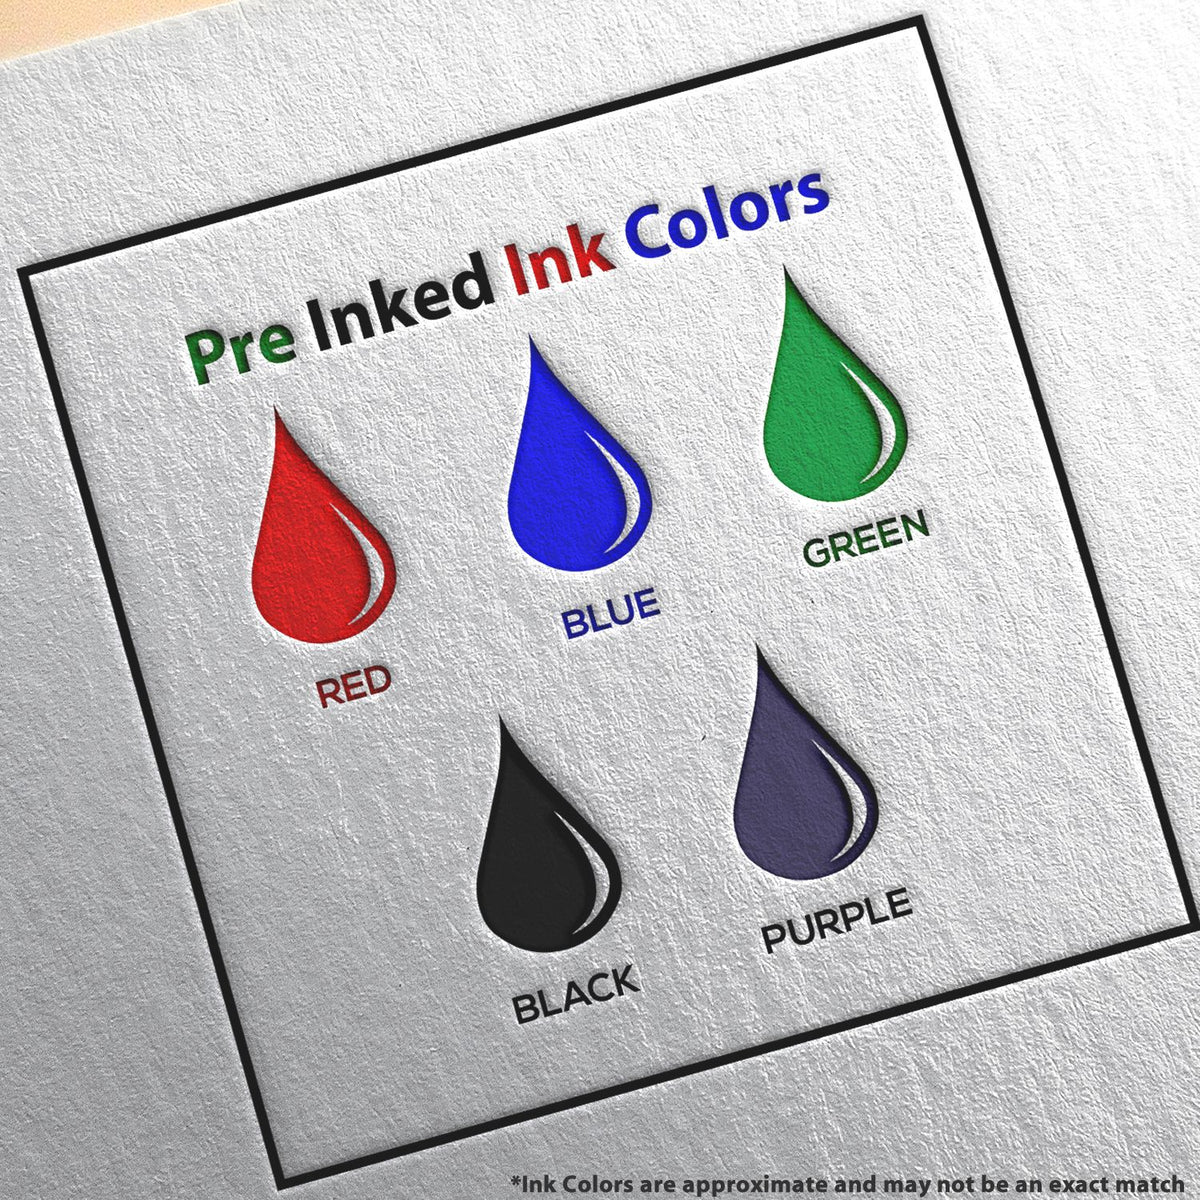 A picture showing the different ink colors or hues available for the Premium MaxLight Pre-Inked North Carolina Engineering Stamp product.